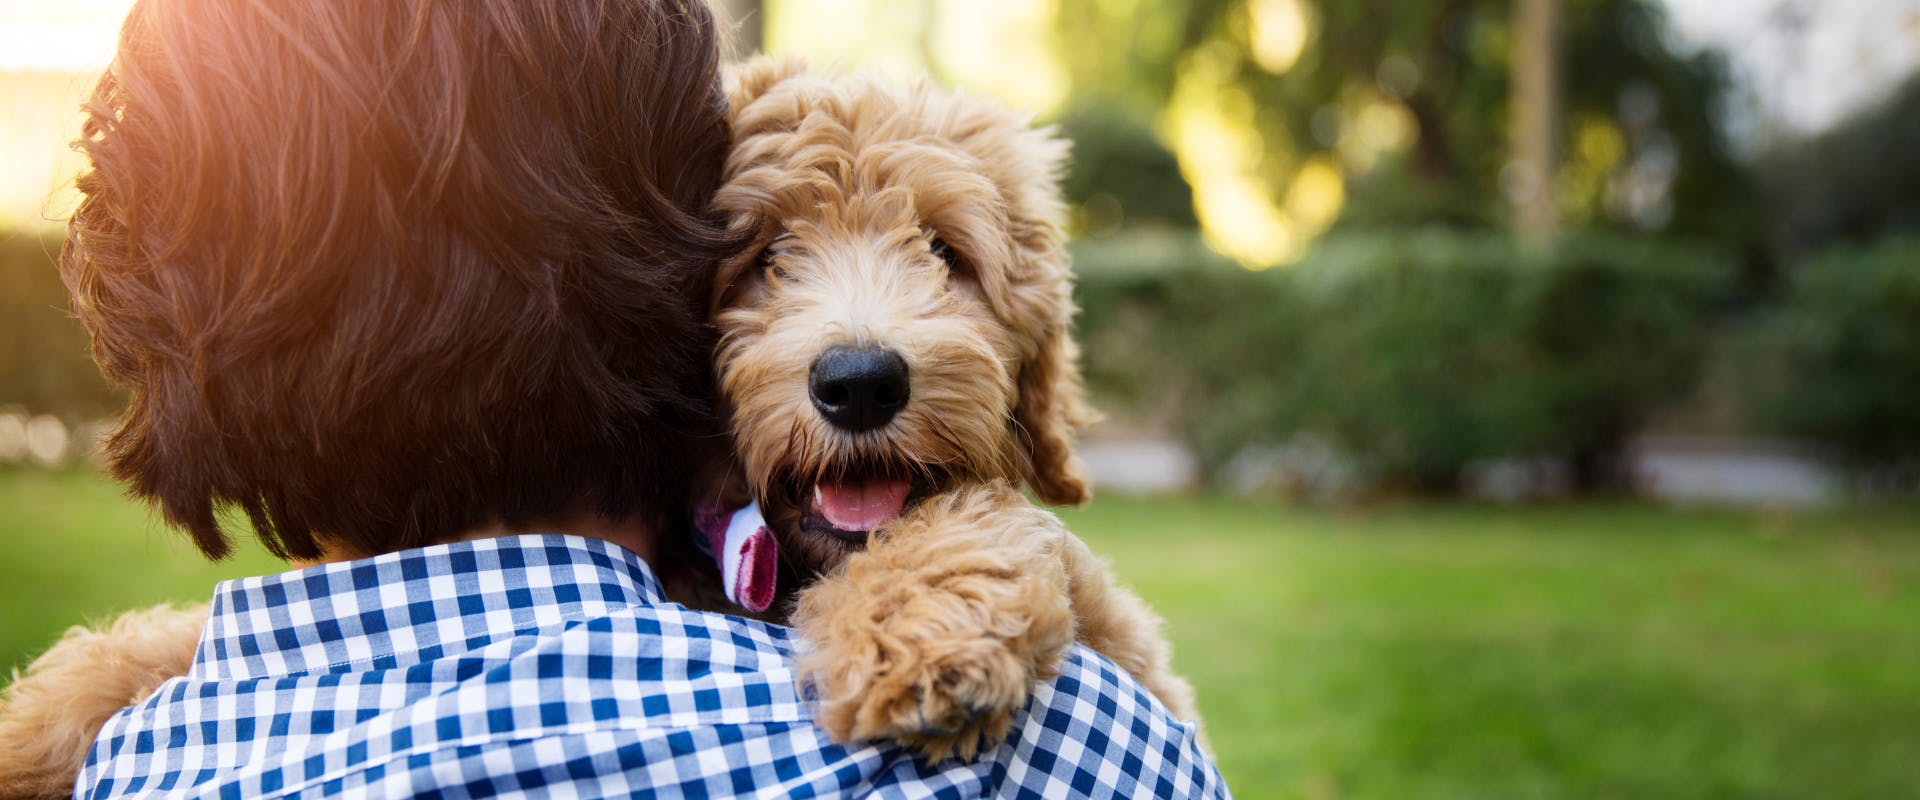 a puppy poodle being carried and cuddle by a human in a garden